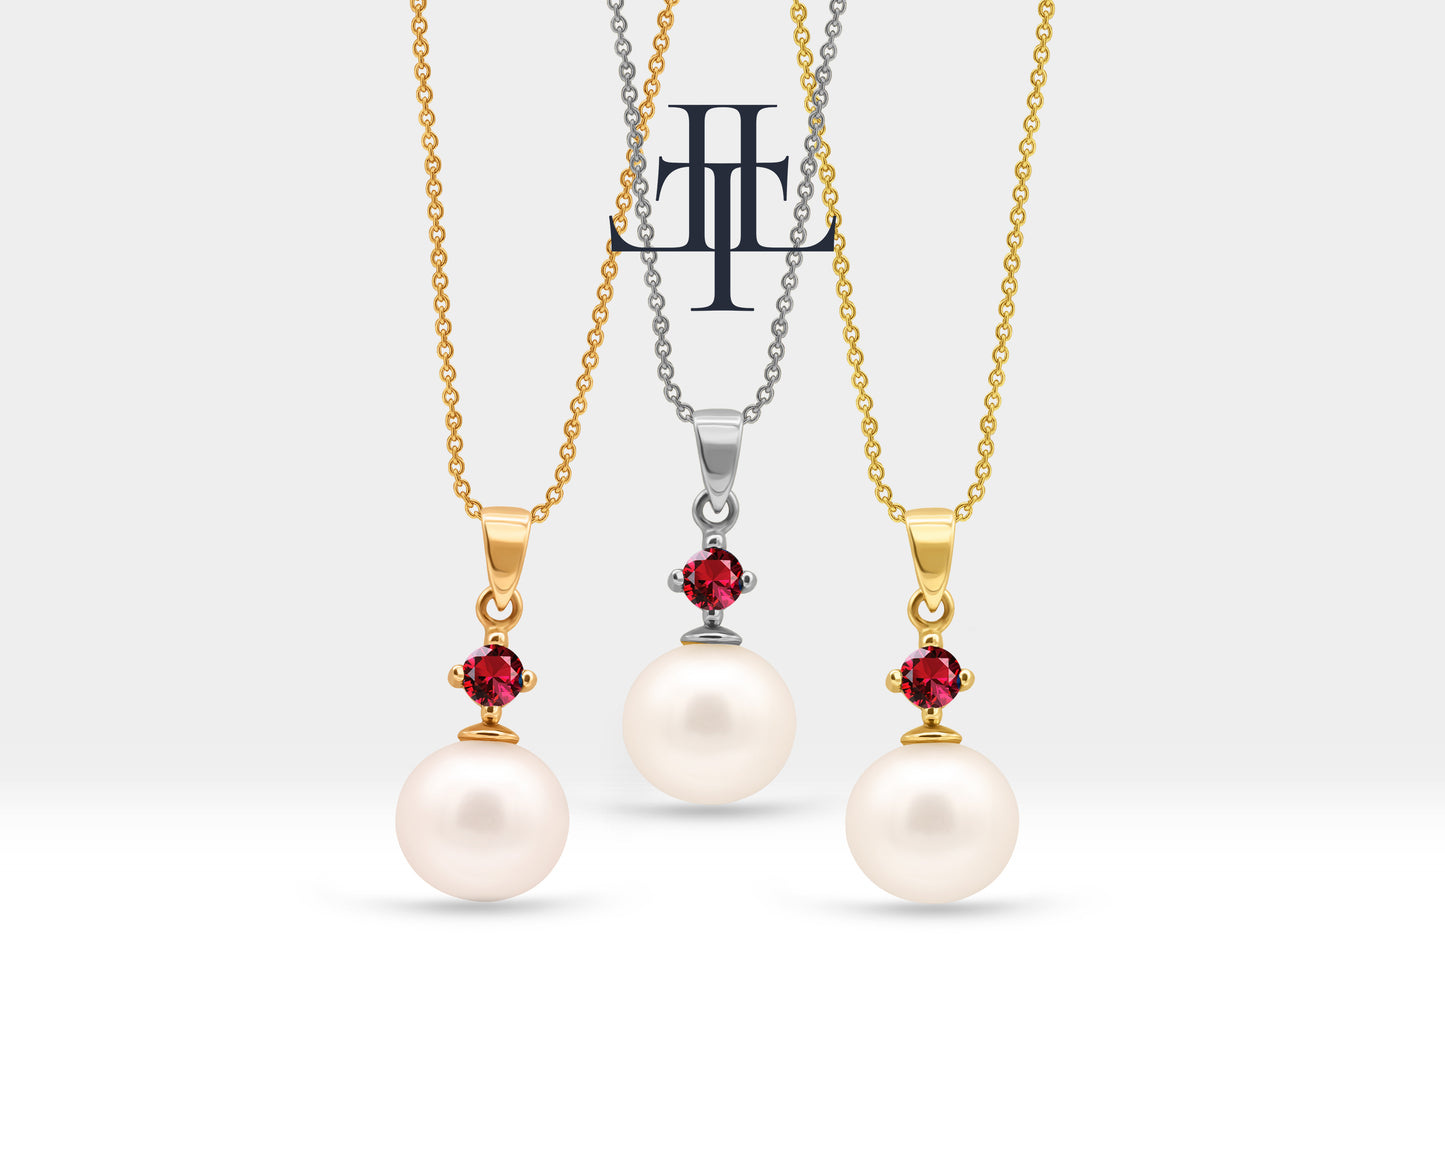 Bridal Jewelry Set of Pearl Earrings and Necklace Set in 14K Solid Gold Jewelry Set with Ruby and Natural Pearl